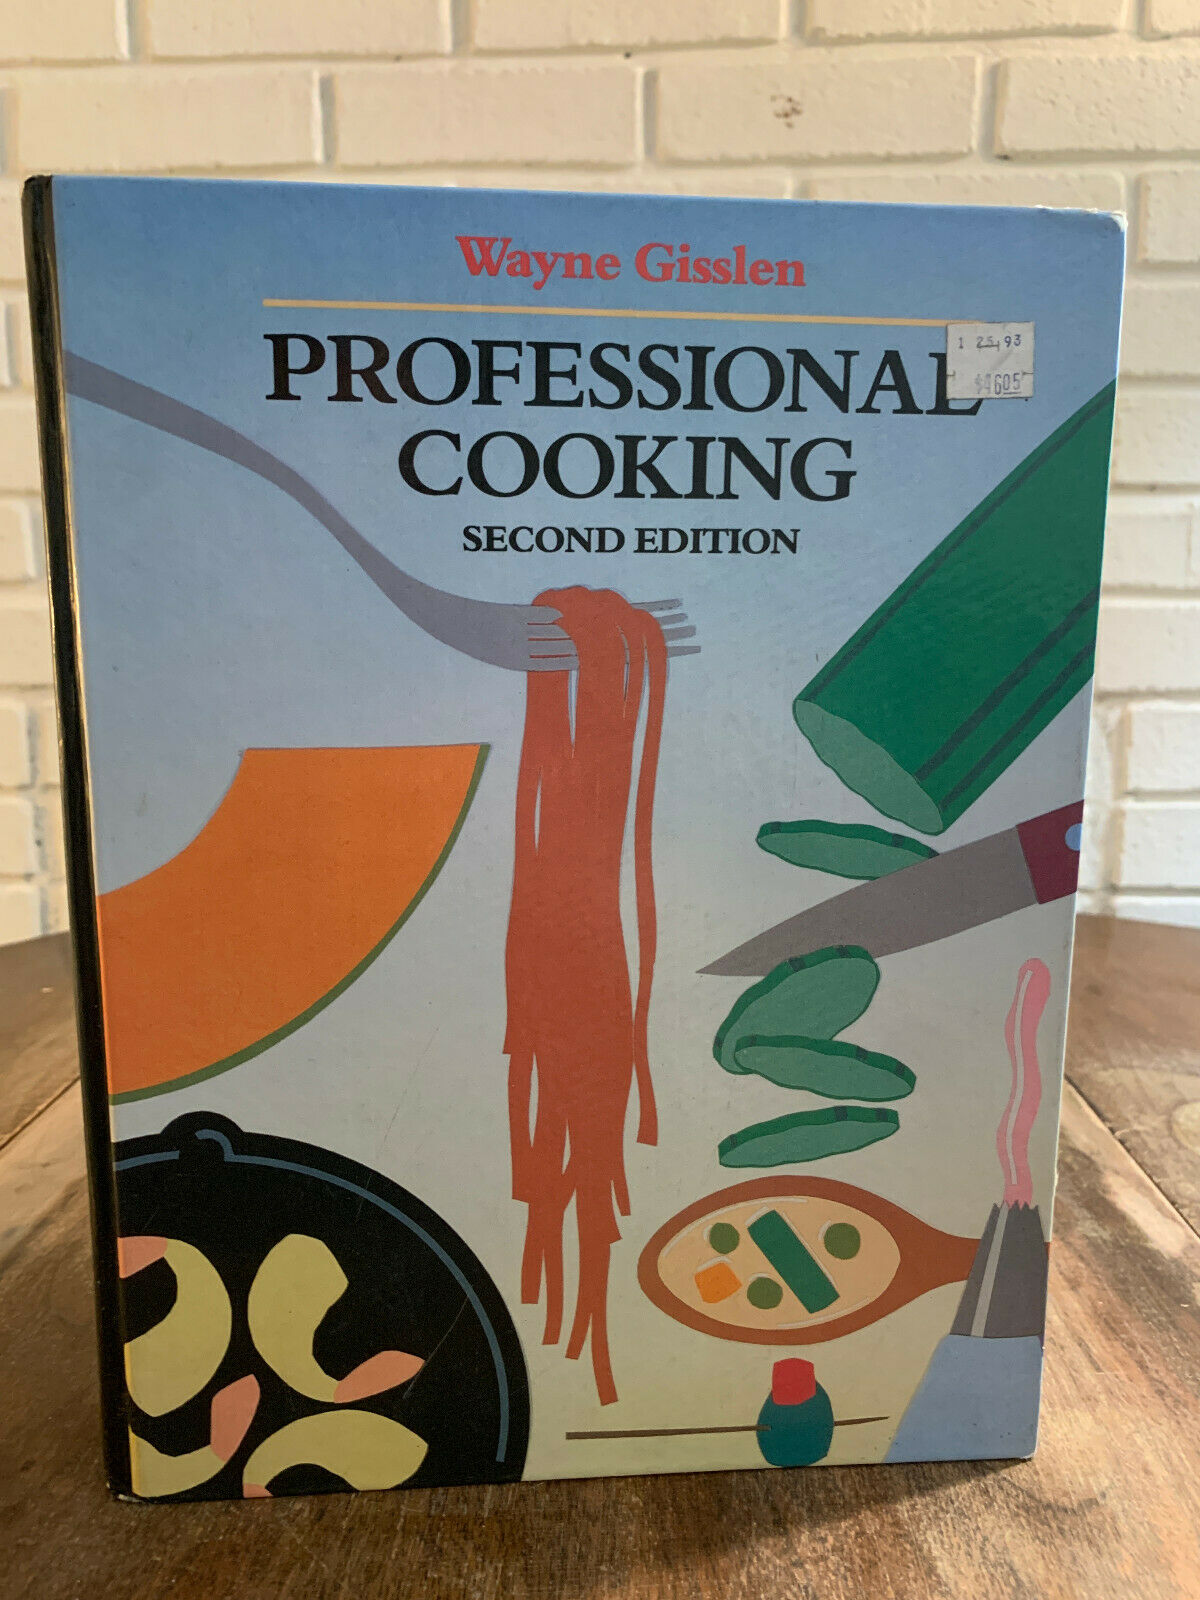 Professional Cooking, Second Edition by Wayne Gisslen (Q5)